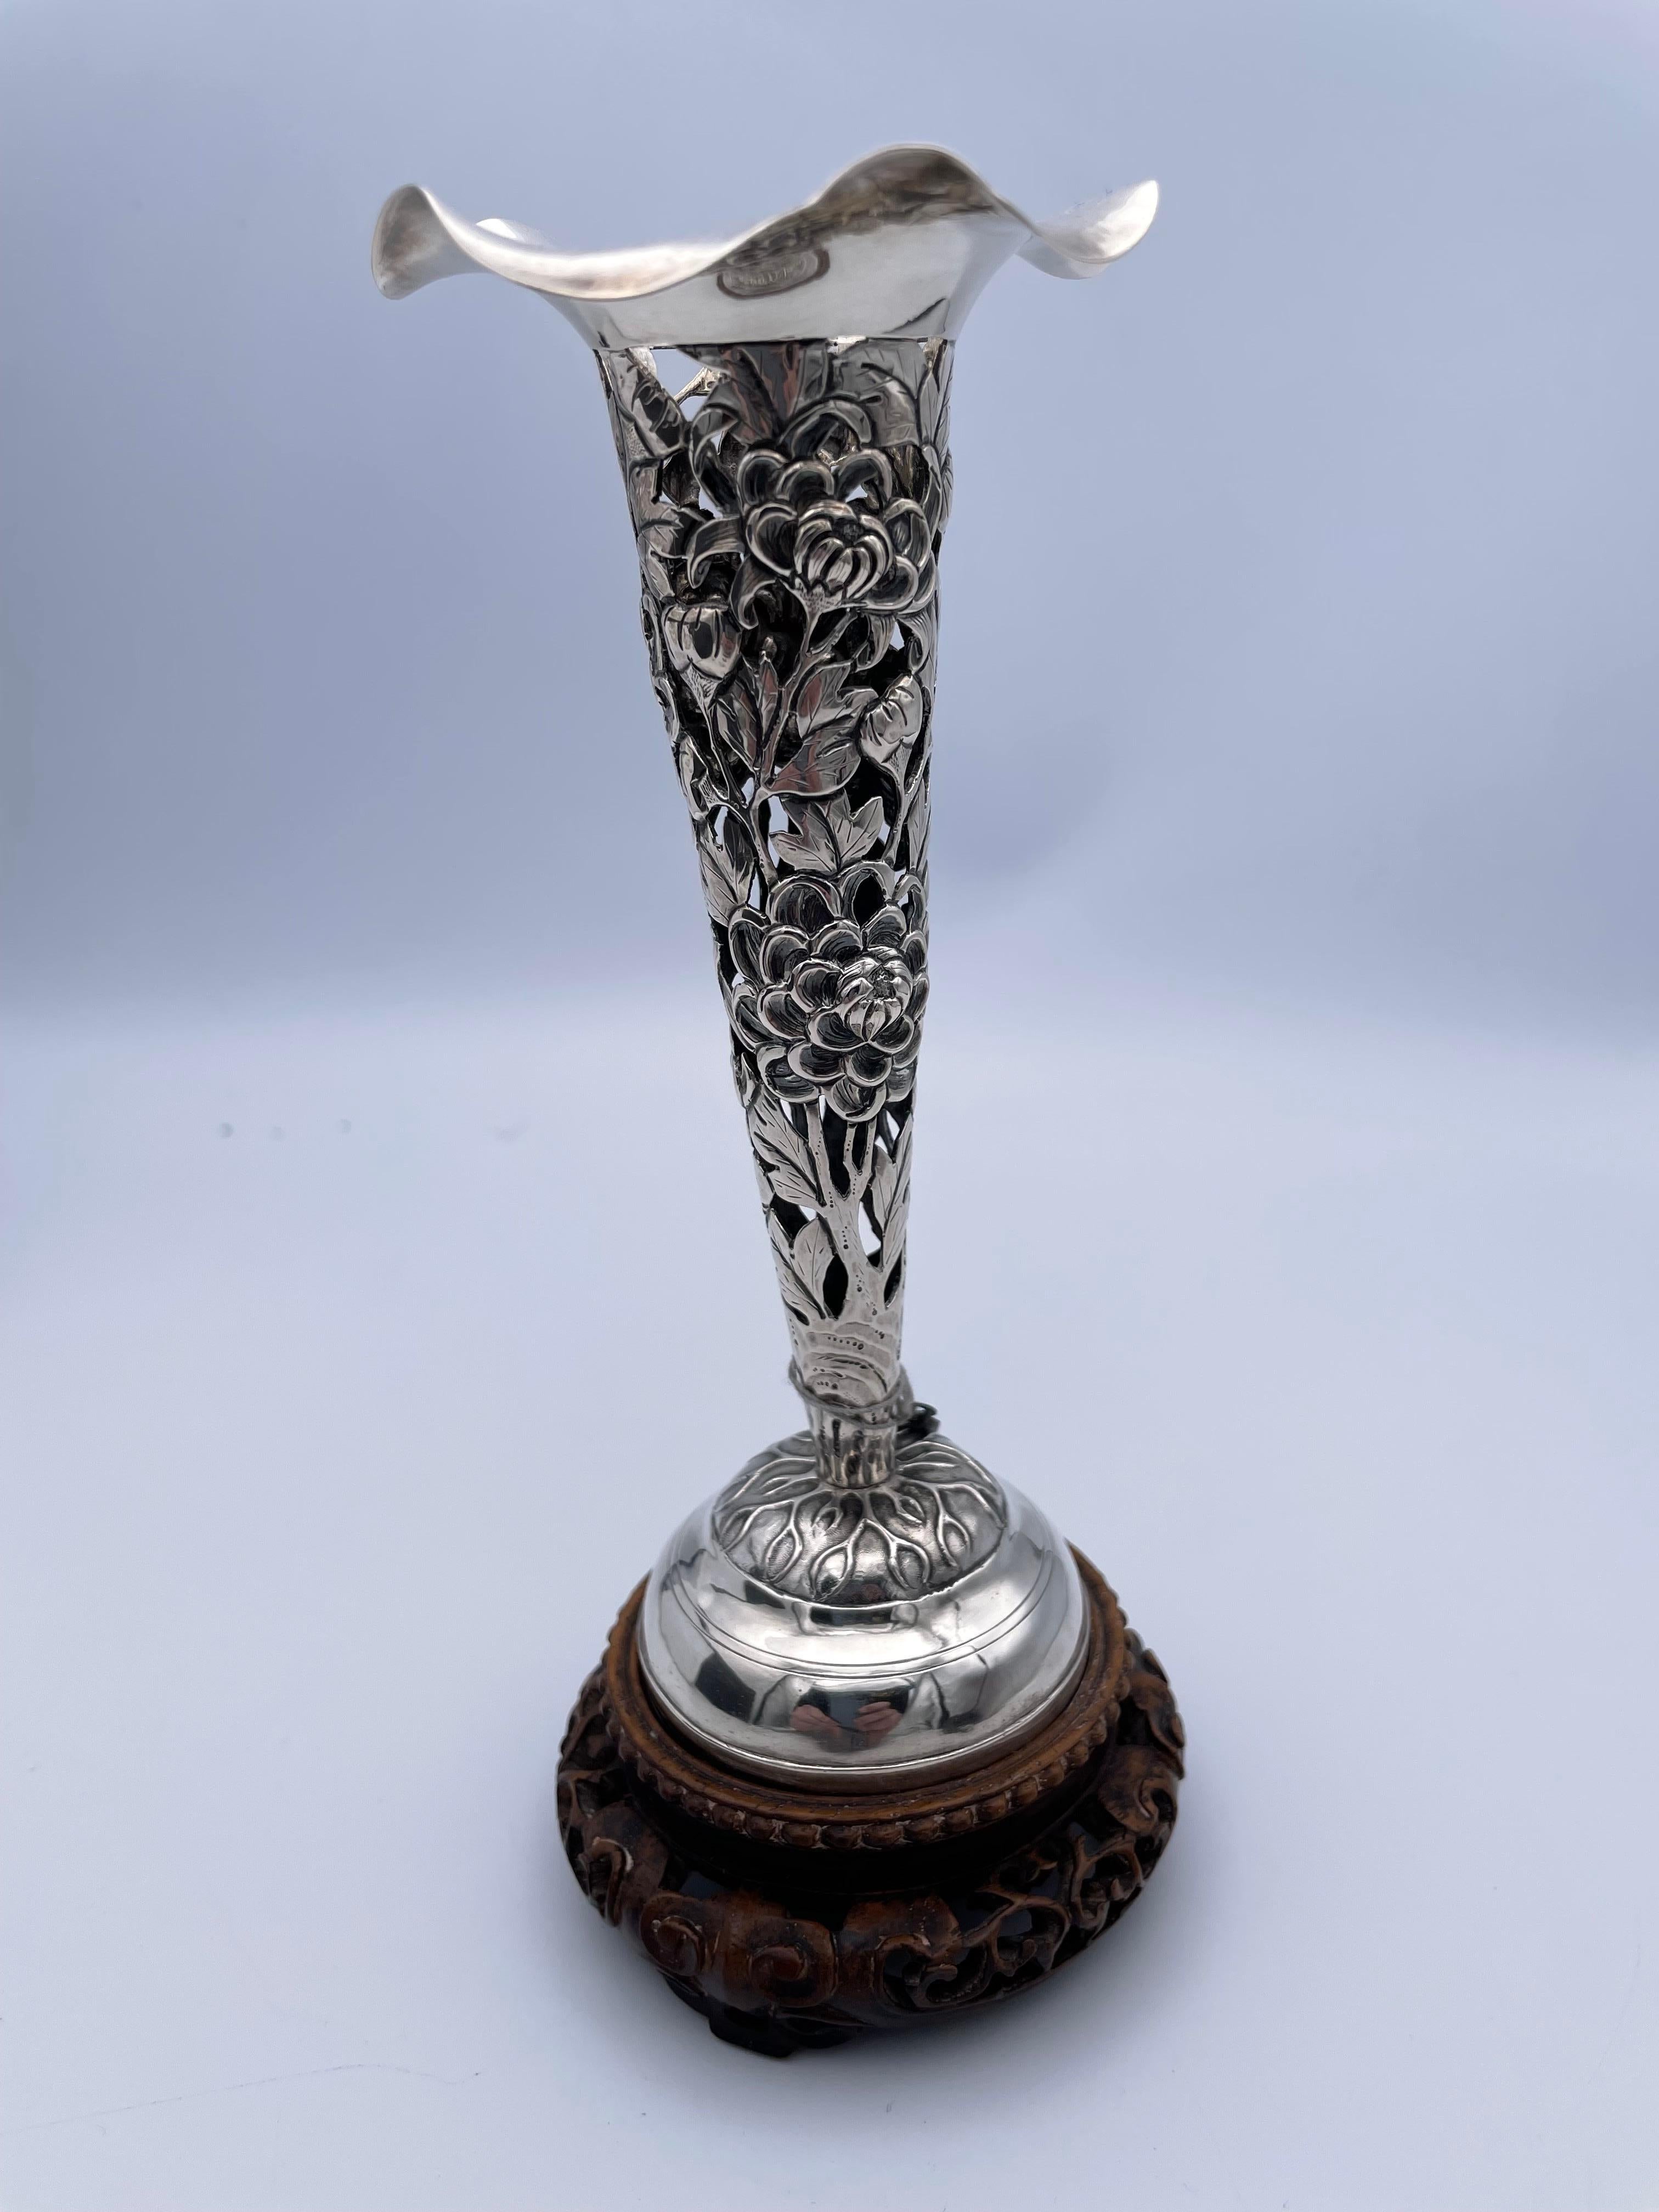 Simply beautiful hand made vase. Made in China, c.1900. The silver is .950, a higher standard than sterling. The vase has an intricate cut-out repousse pattern of flowers and leaves. The top of the vase is gracefully scalloped. It is mounted on the